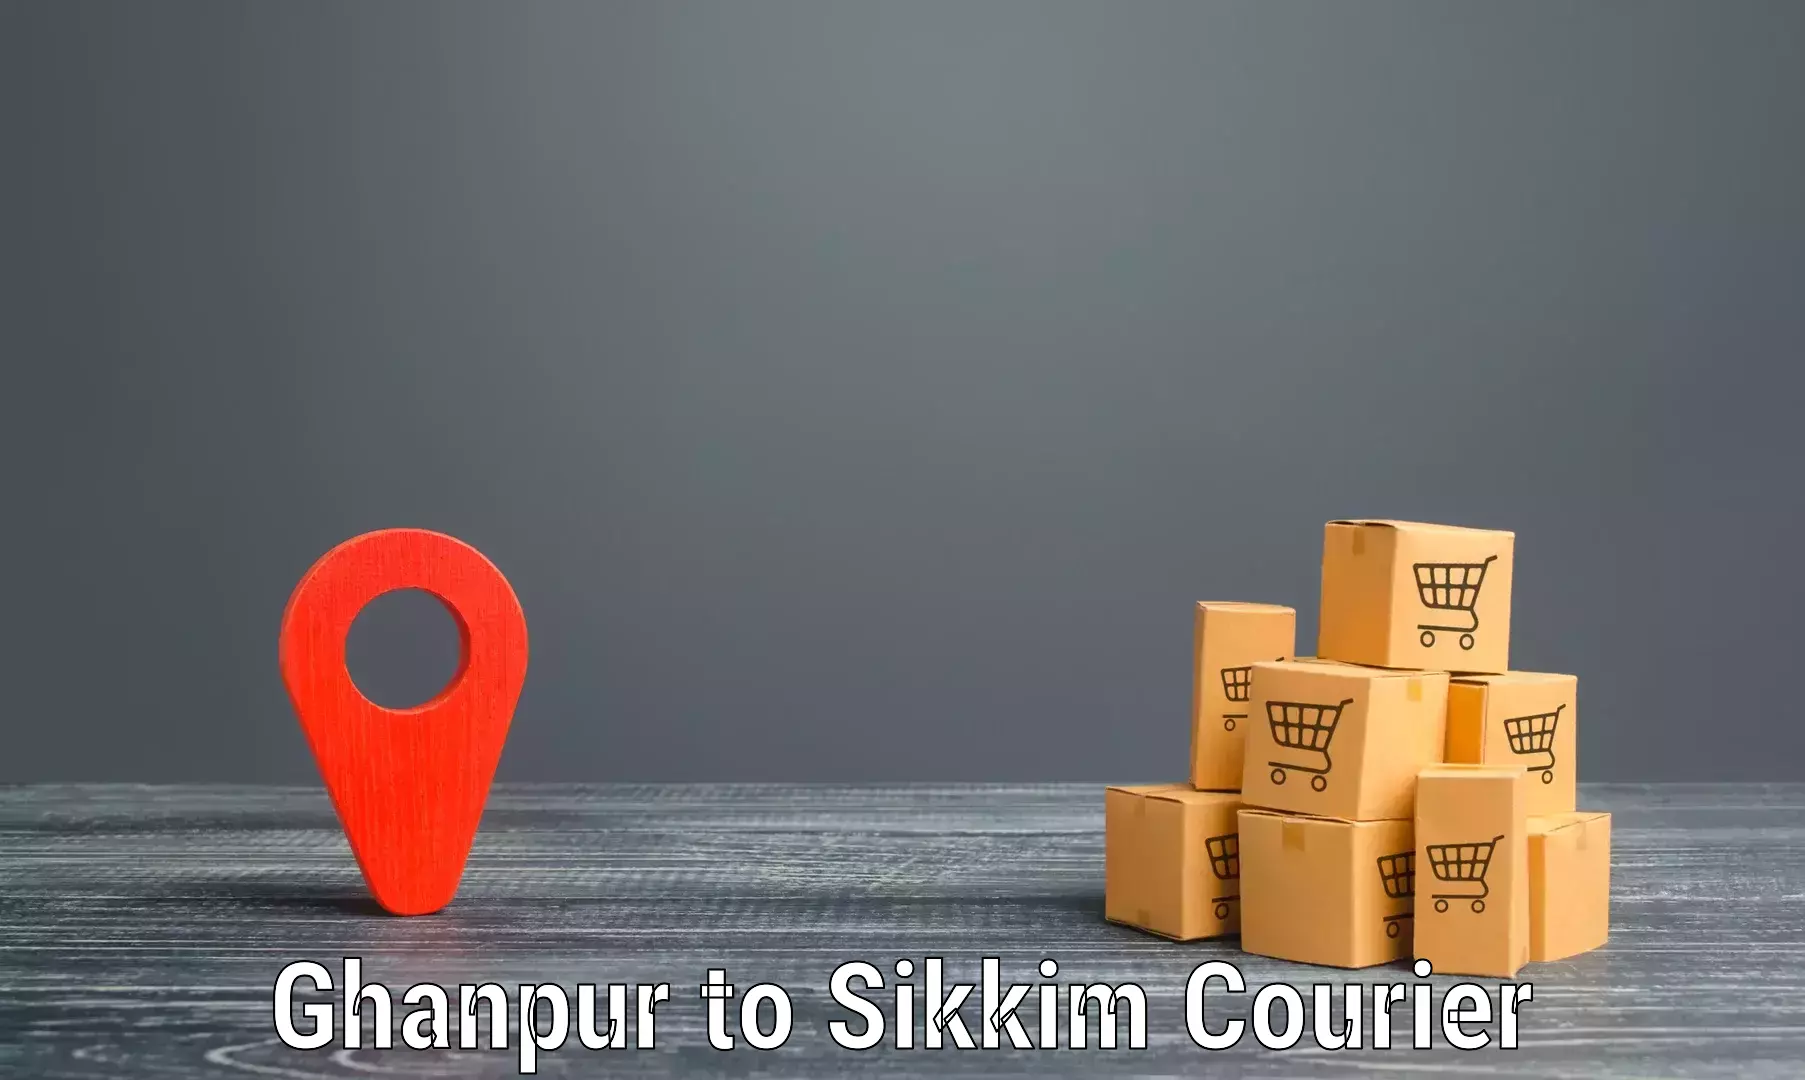 High-capacity parcel service Ghanpur to Pelling